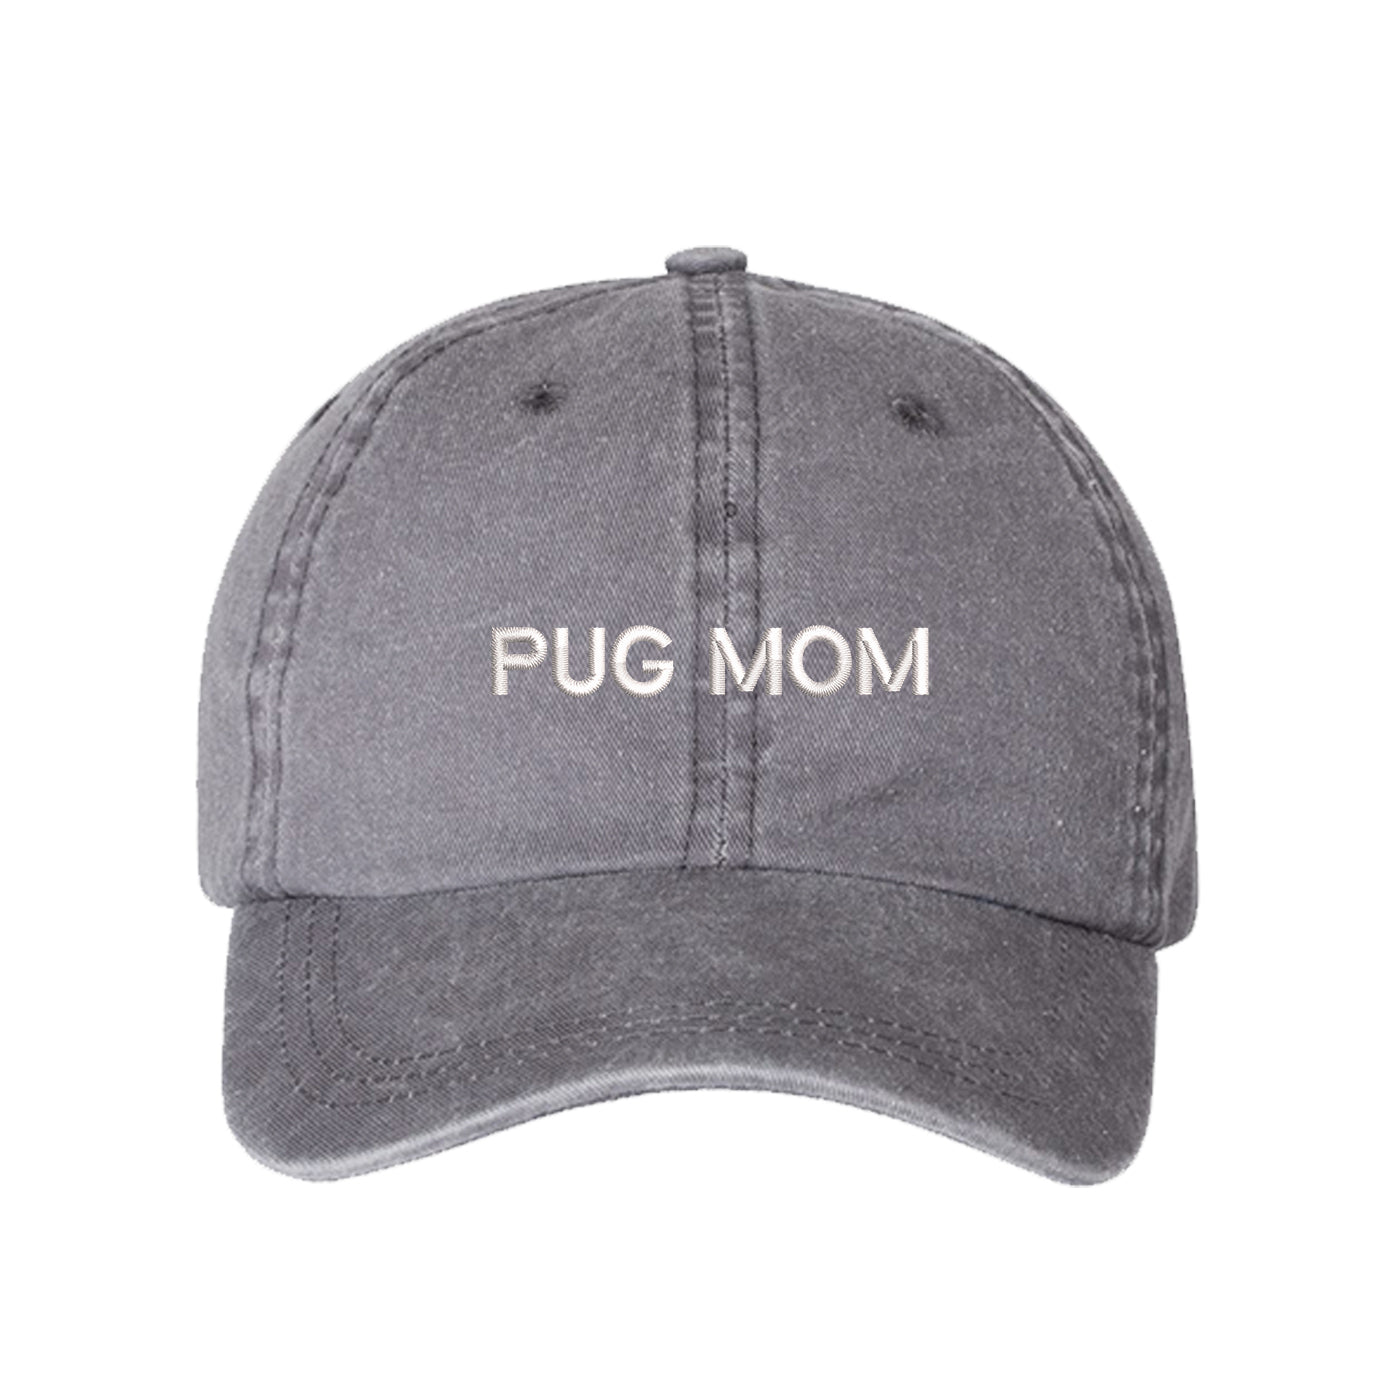 Pug Mom Washed Baseball Hat, Pug Mom Dad Hat, Dog Parent Hats, Embroidered Dad hat, Animal Lover Gifts, Pug Mother, Mothers Day Gift, Pug Mama, DSY Lifestyle Dad Hats, Gray Washed Baseball Hat